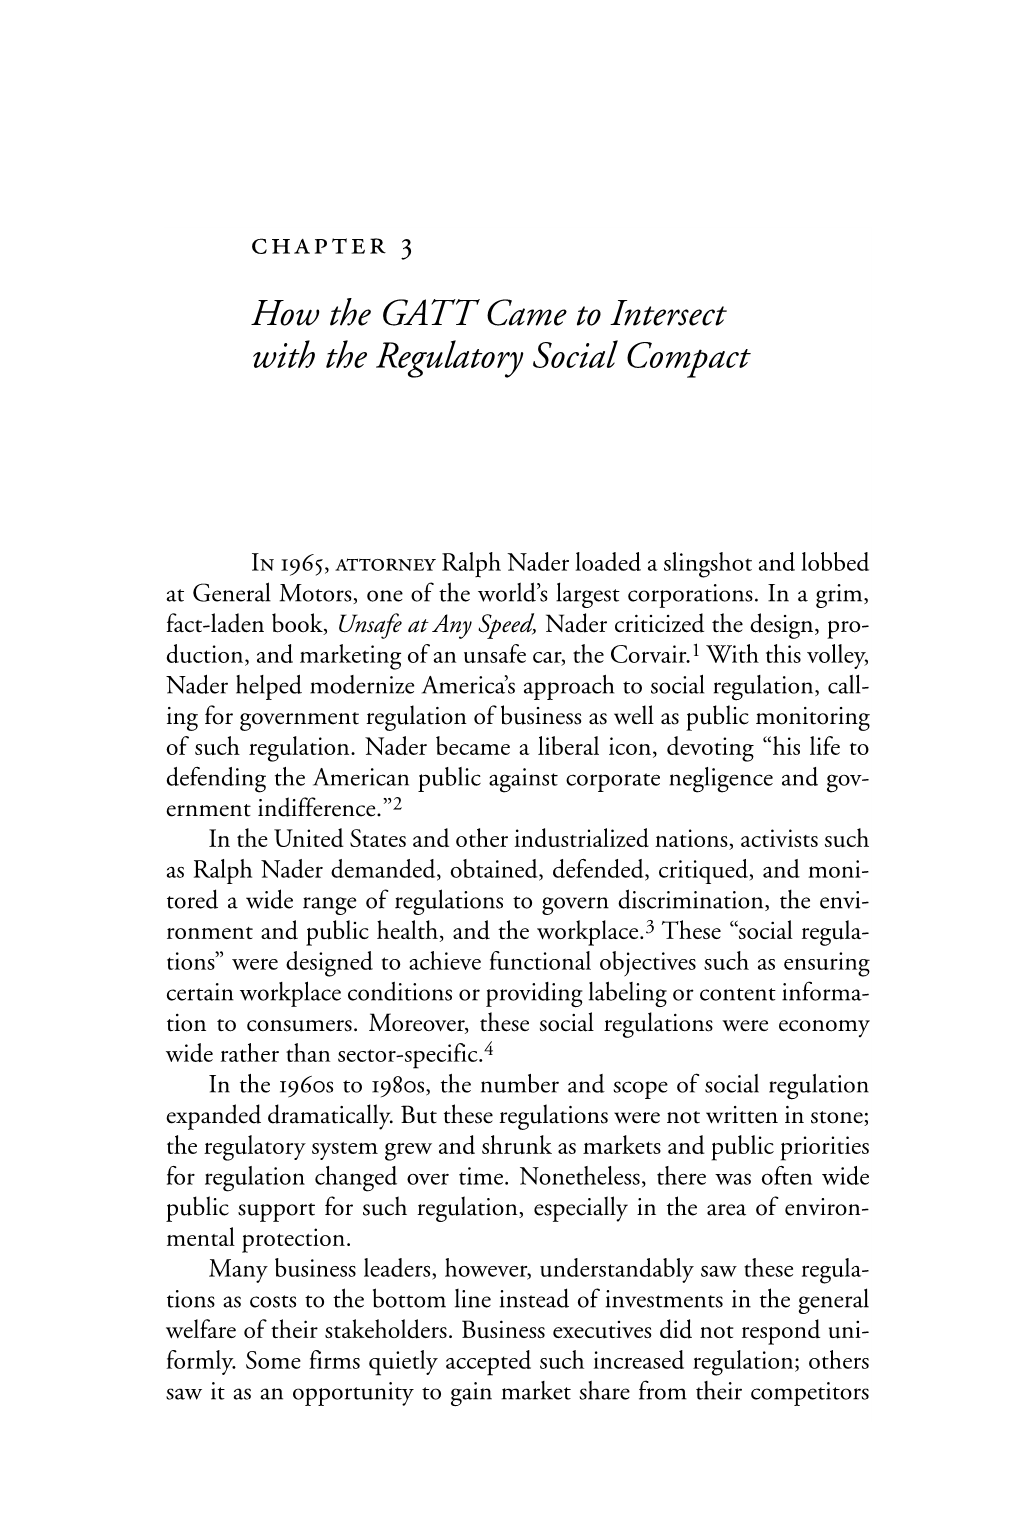 How the GATT Came to Intersect with the Regulatory Social Compact